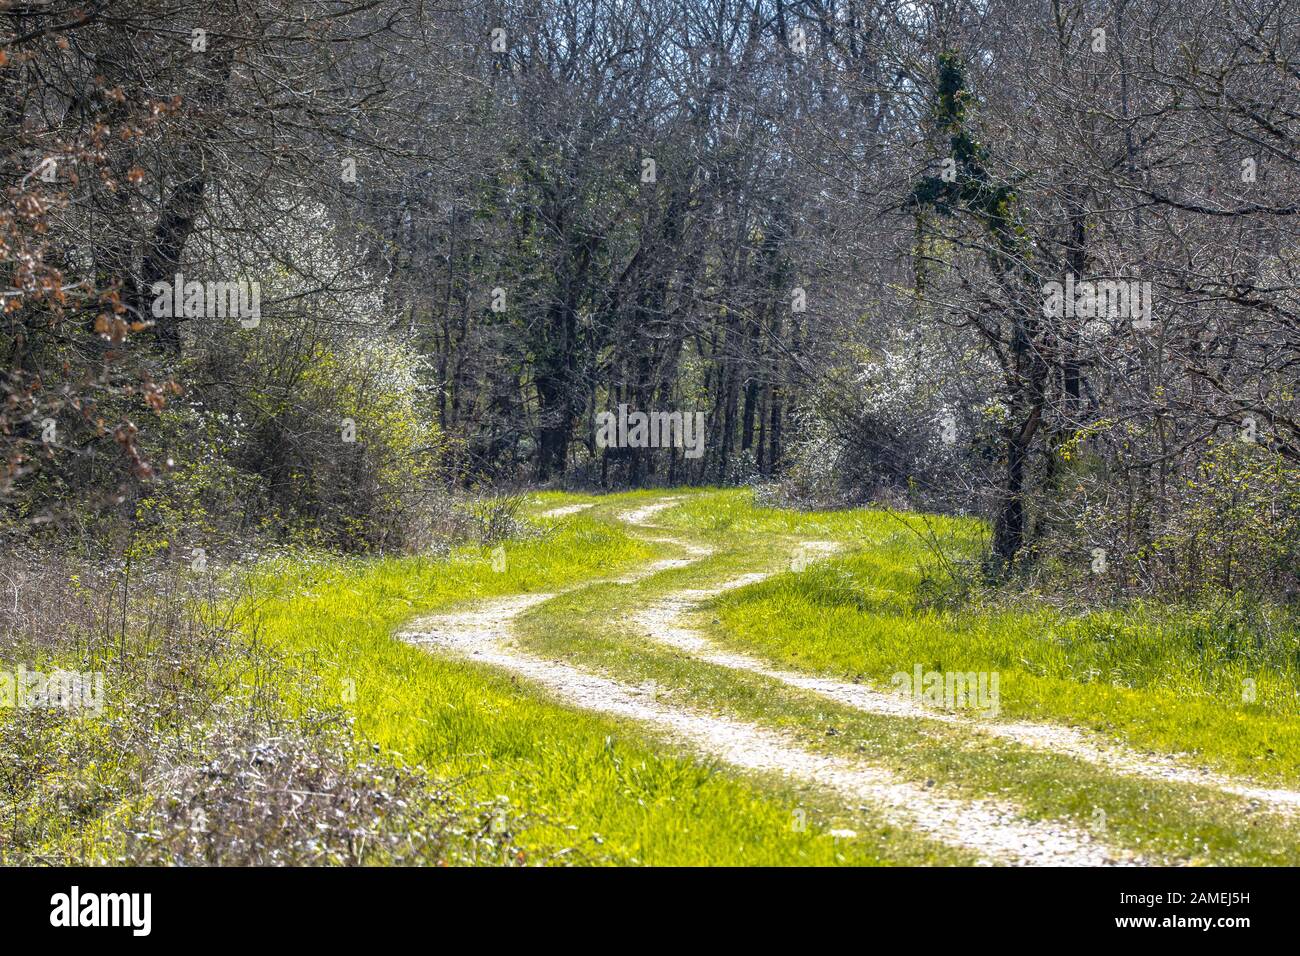 Trees and bushes along forest track with blossom of Amelanchier (Amelanchier ovalis) and Common hawthorn (Crataegus monogyna) in March, La Brenne Fran Stock Photo